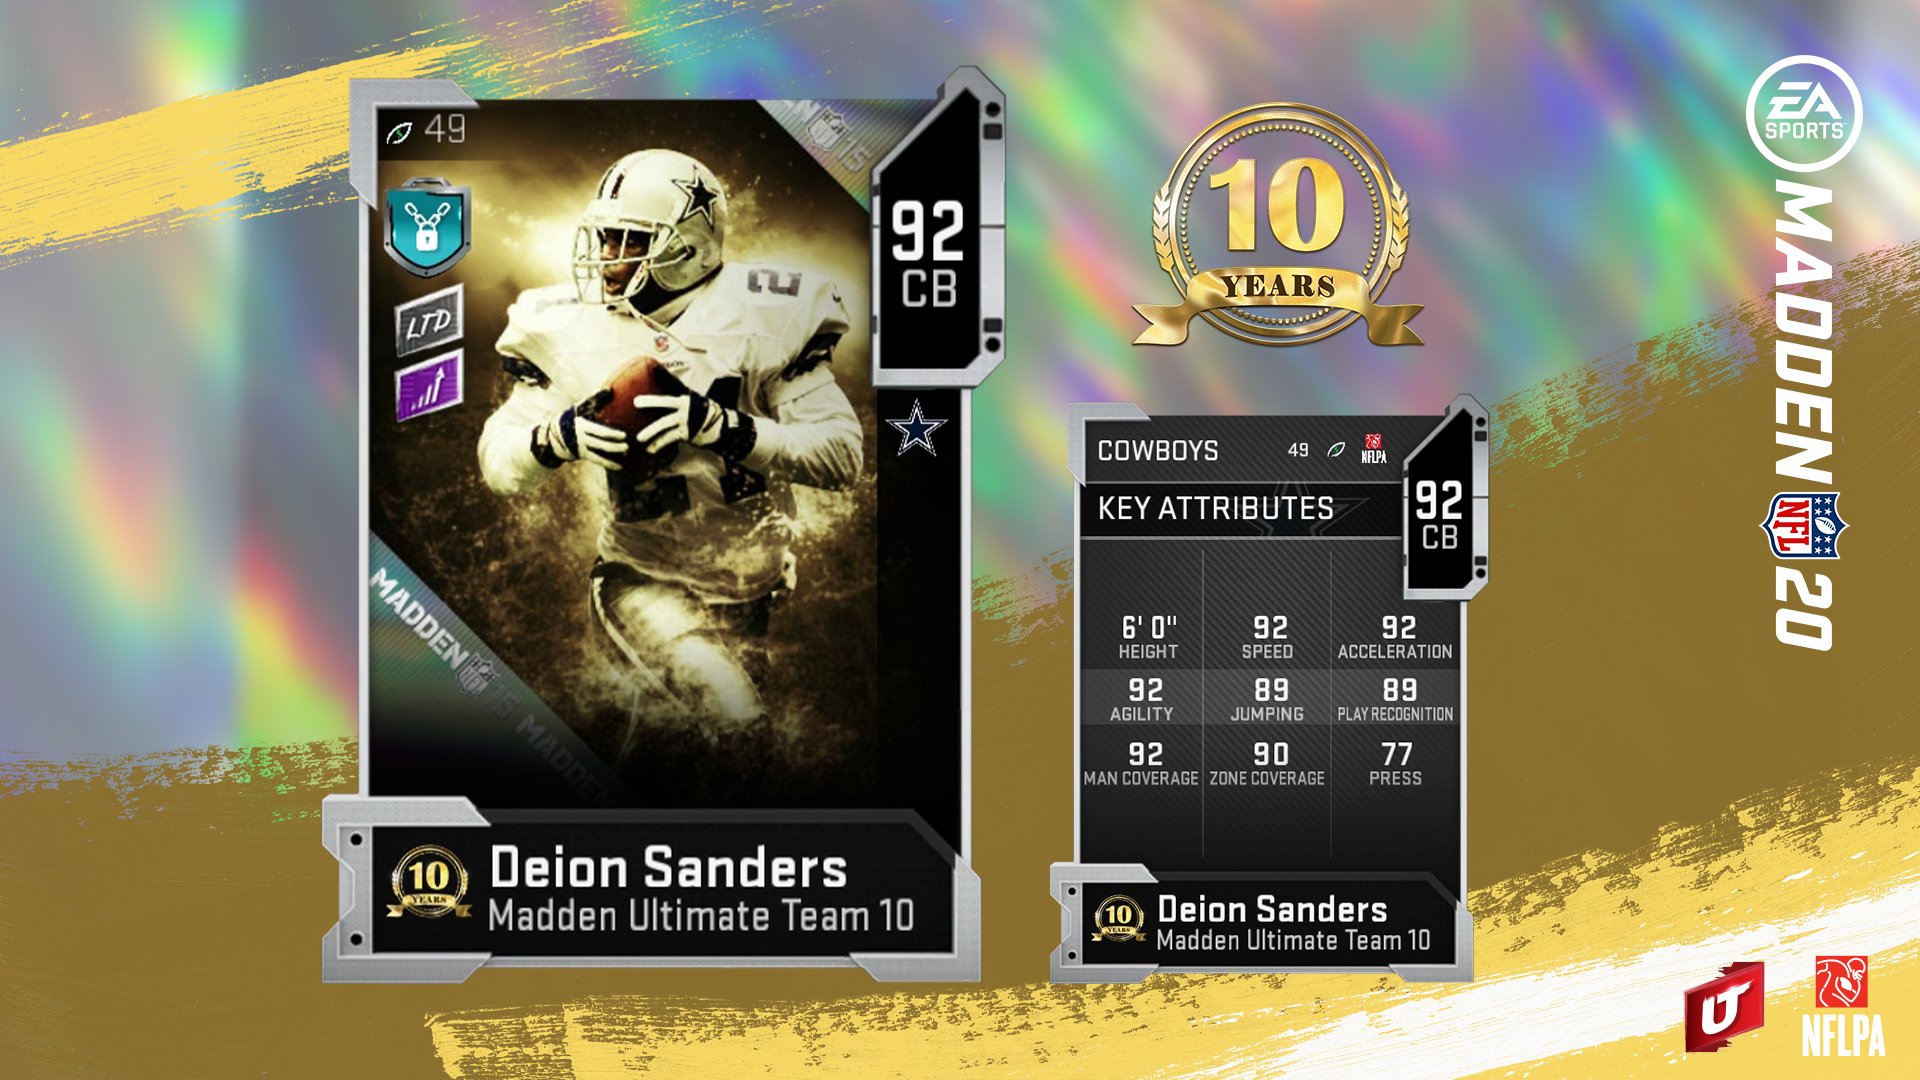 madden 20 mut 10 card for deion sanders in ultimate team